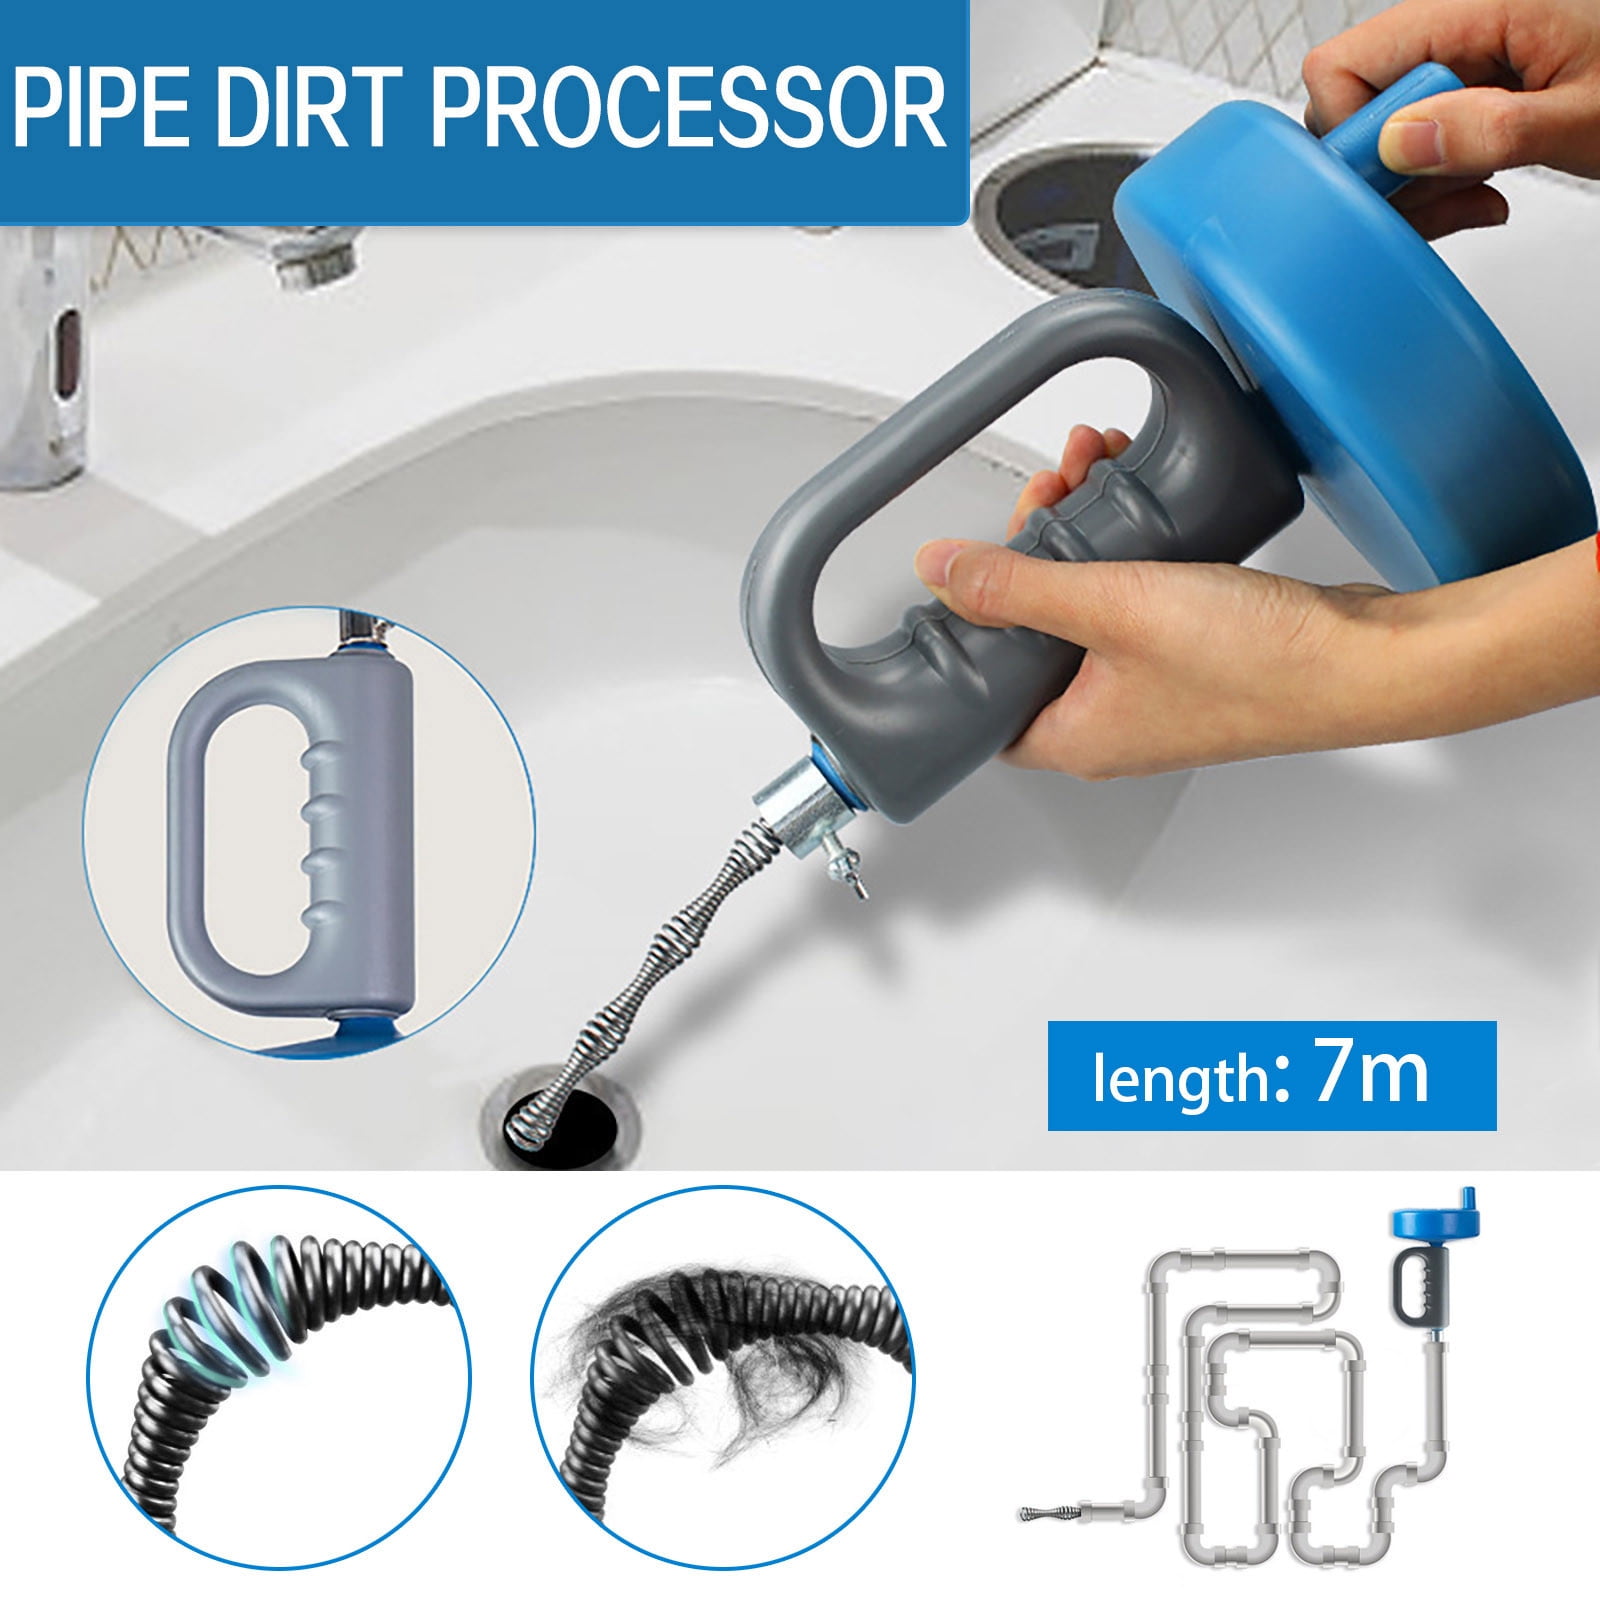 36 Snake Drain Clog Remover - Used as Hair Clog Remover for Sink, Shower,  and Bathtub - Dryer Vent Cleaner, and as a Flexible Grabber Tool for Hard  to Reach Places 